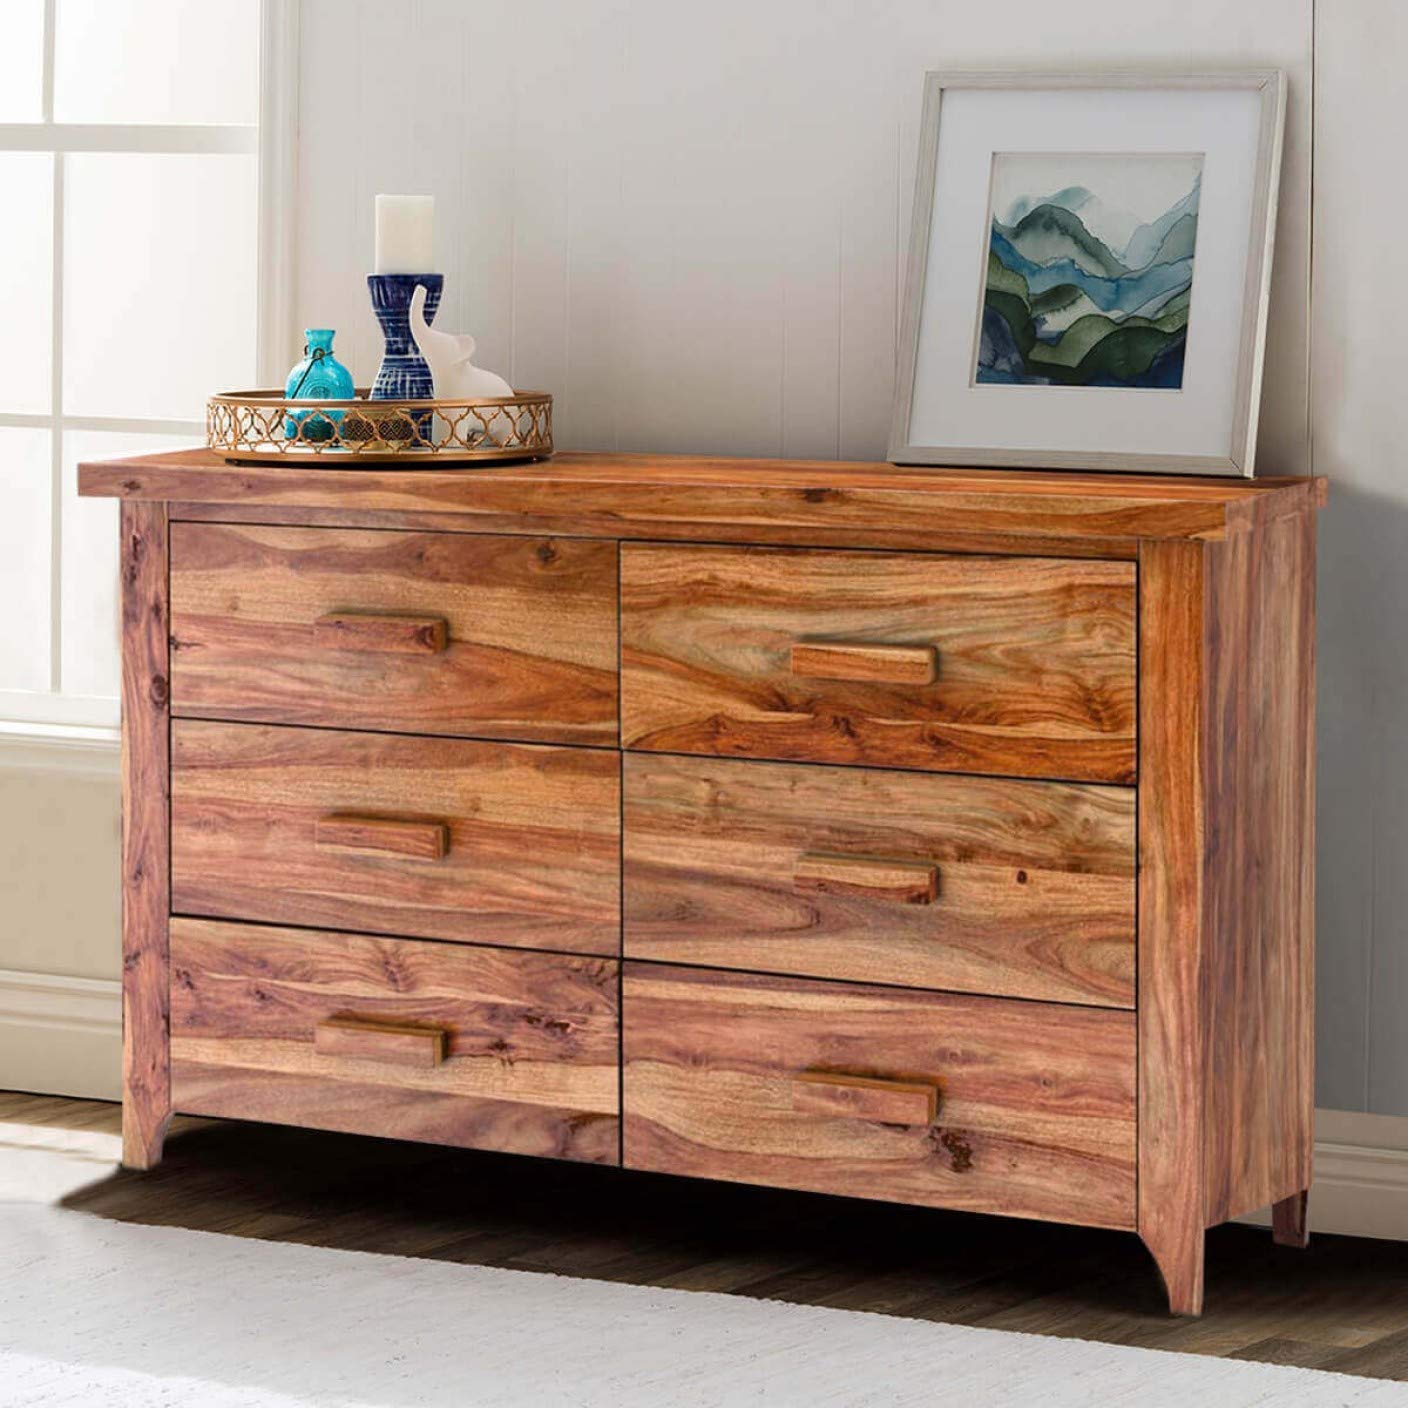 Buy Wood Chest Online In India -  India